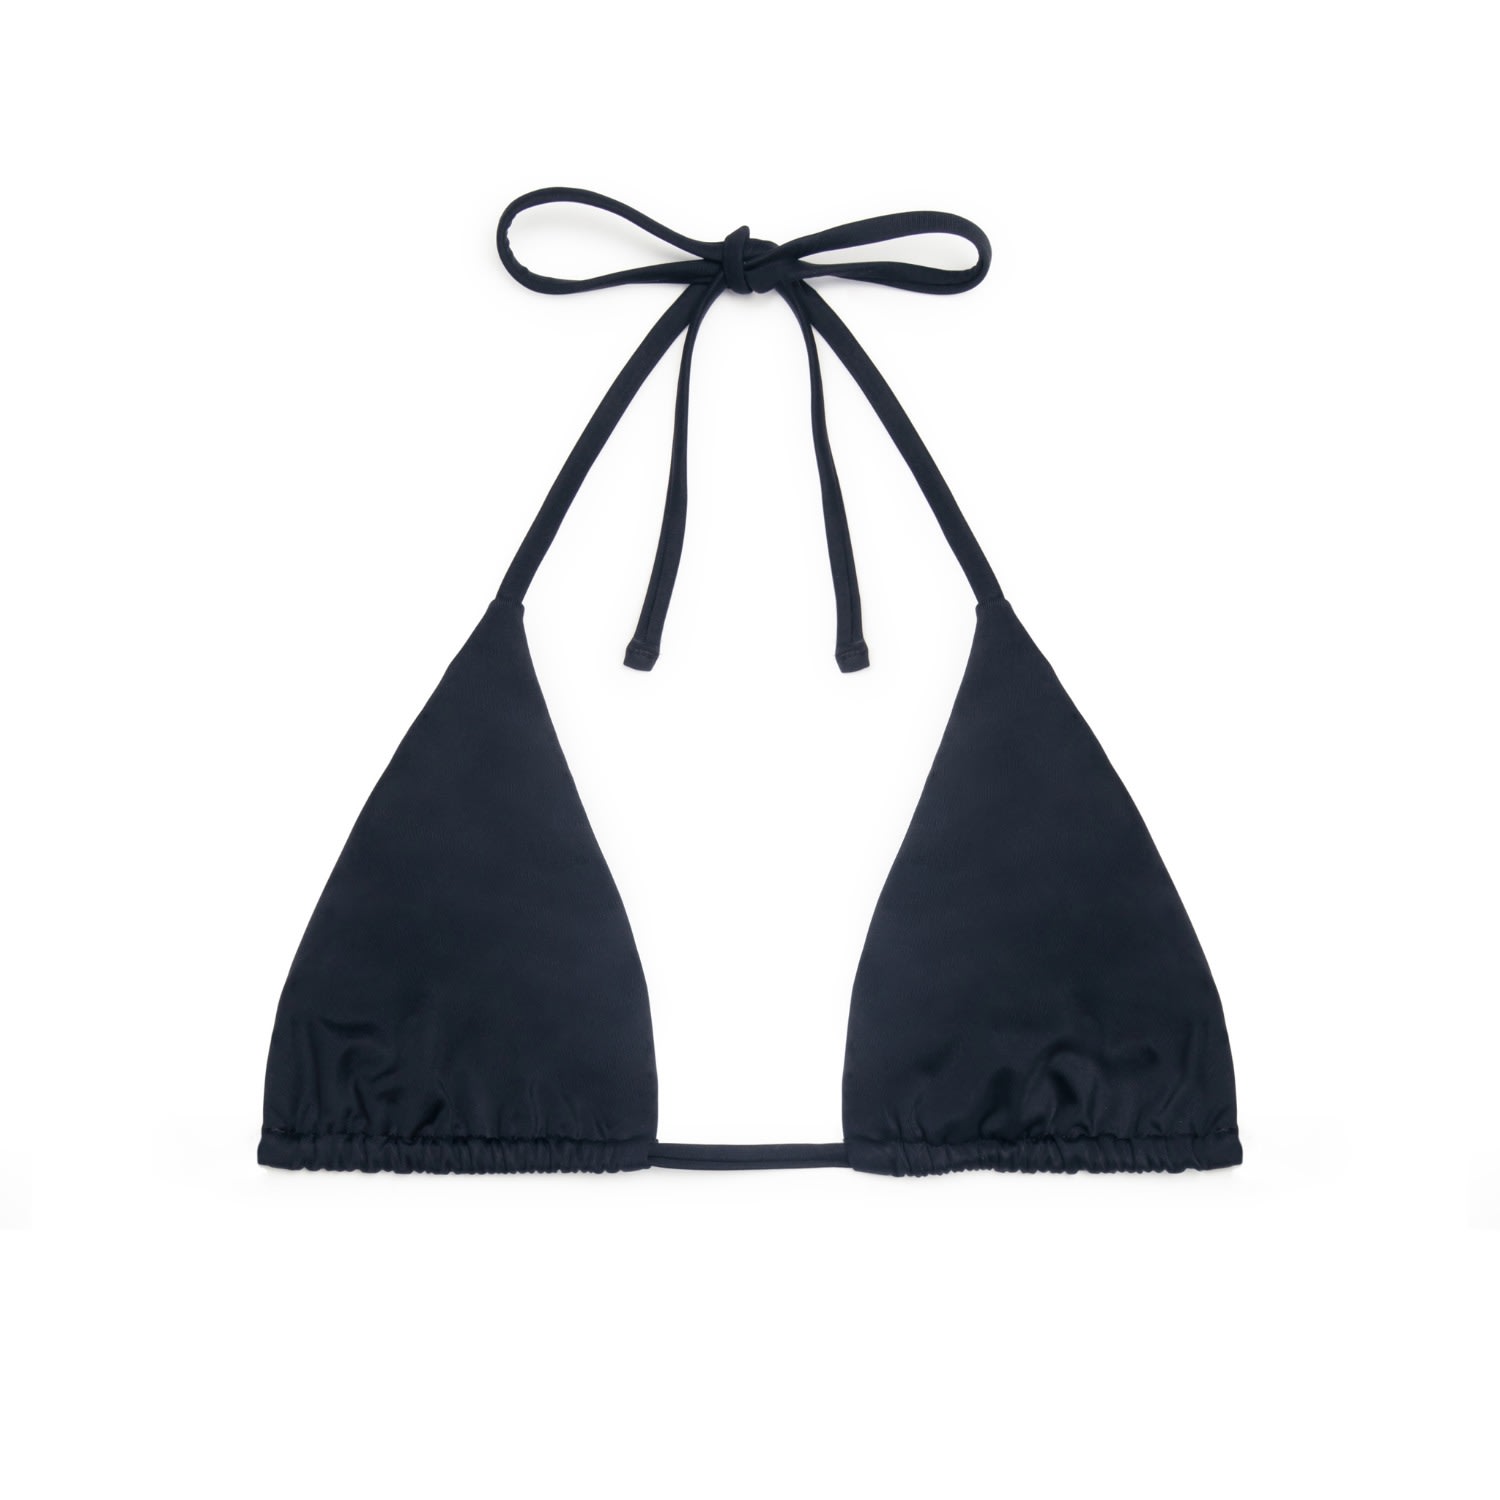 Women’s Athena Triangle Bikini Top In Black Small Poetry by Locals